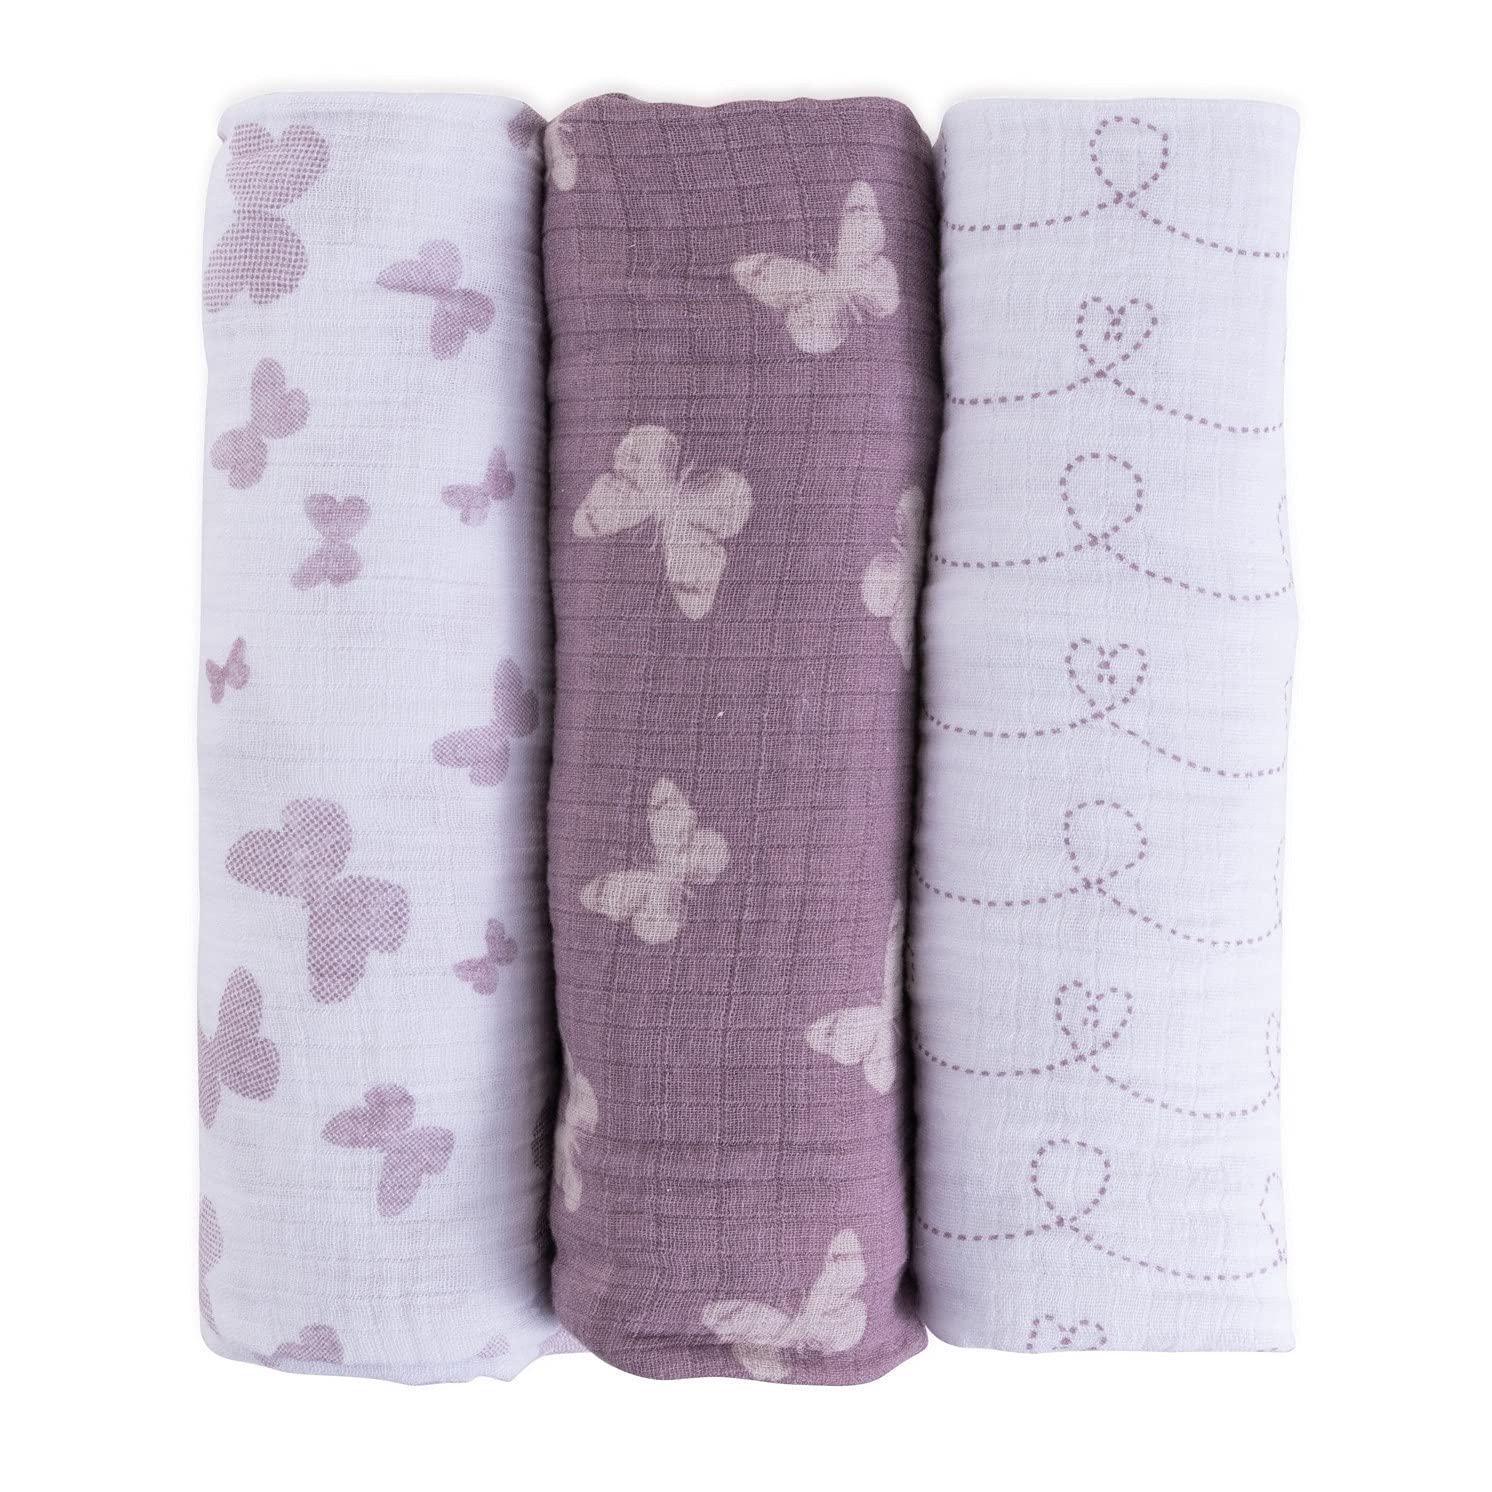 Ely's and Co. Muslin Swaddle Blanket 100% Soft Muslin Cotton 3 Pack 47 x 47 (Lavender Butterfly)-